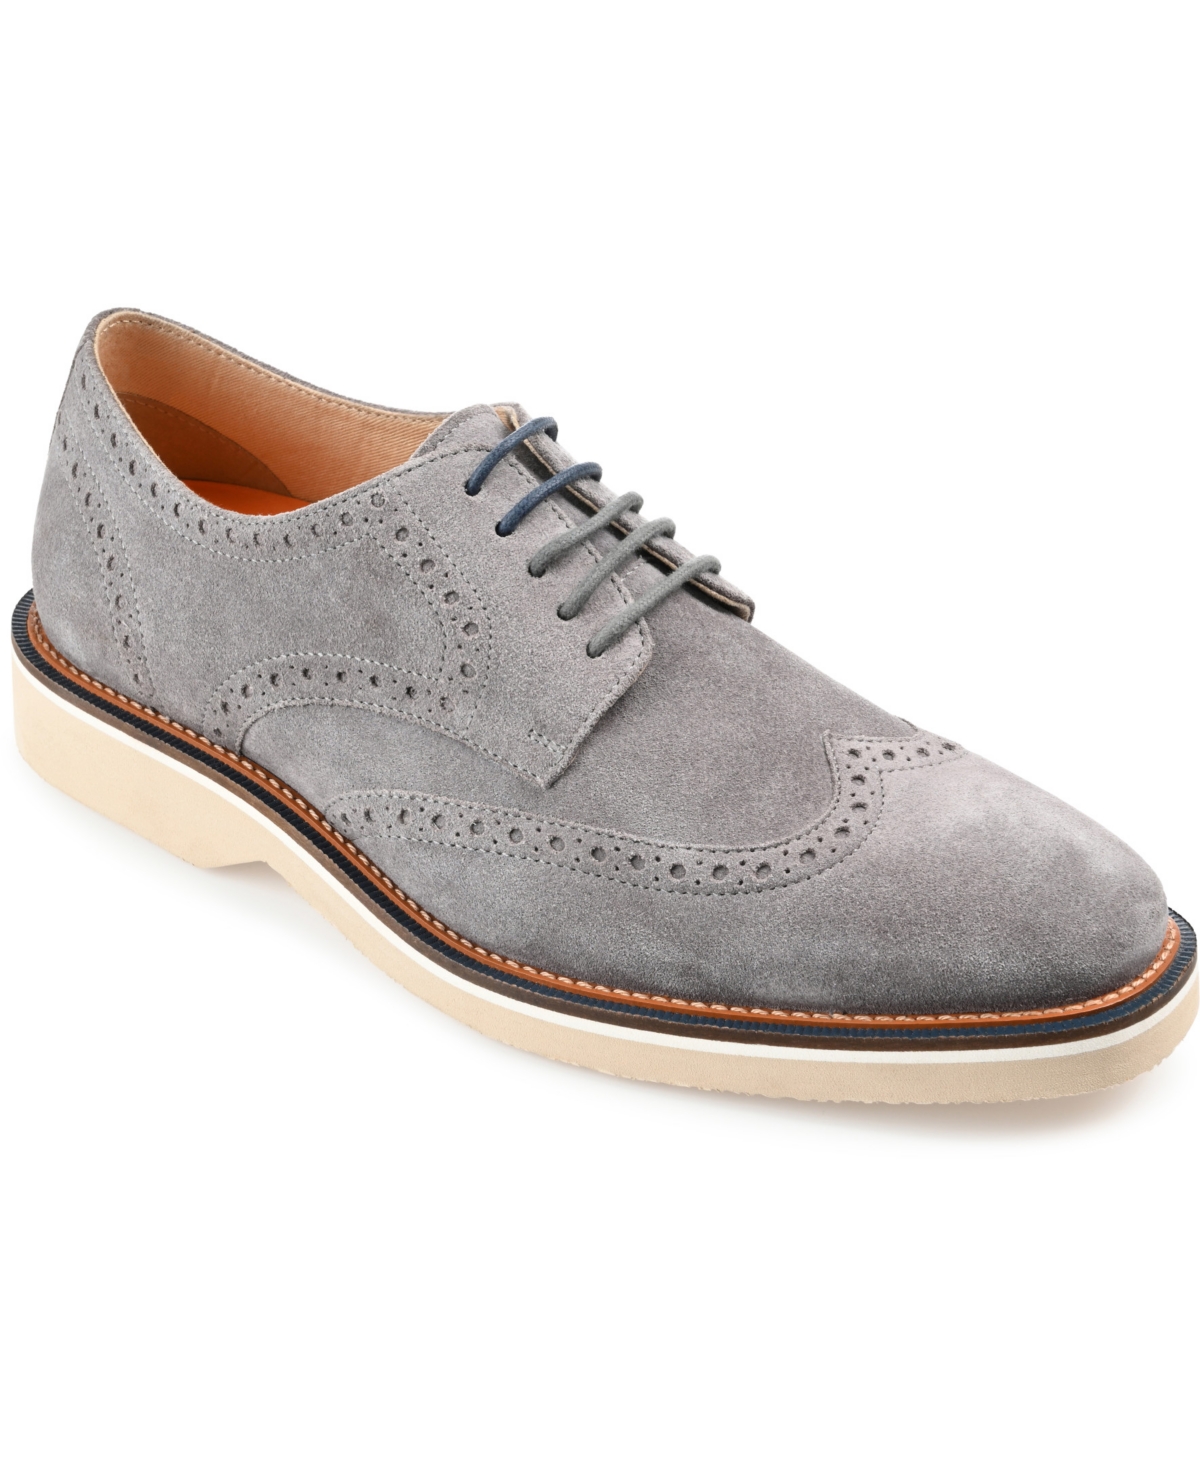 Men's Chadwick Wingtip Derby Dress Shoes - Taupe